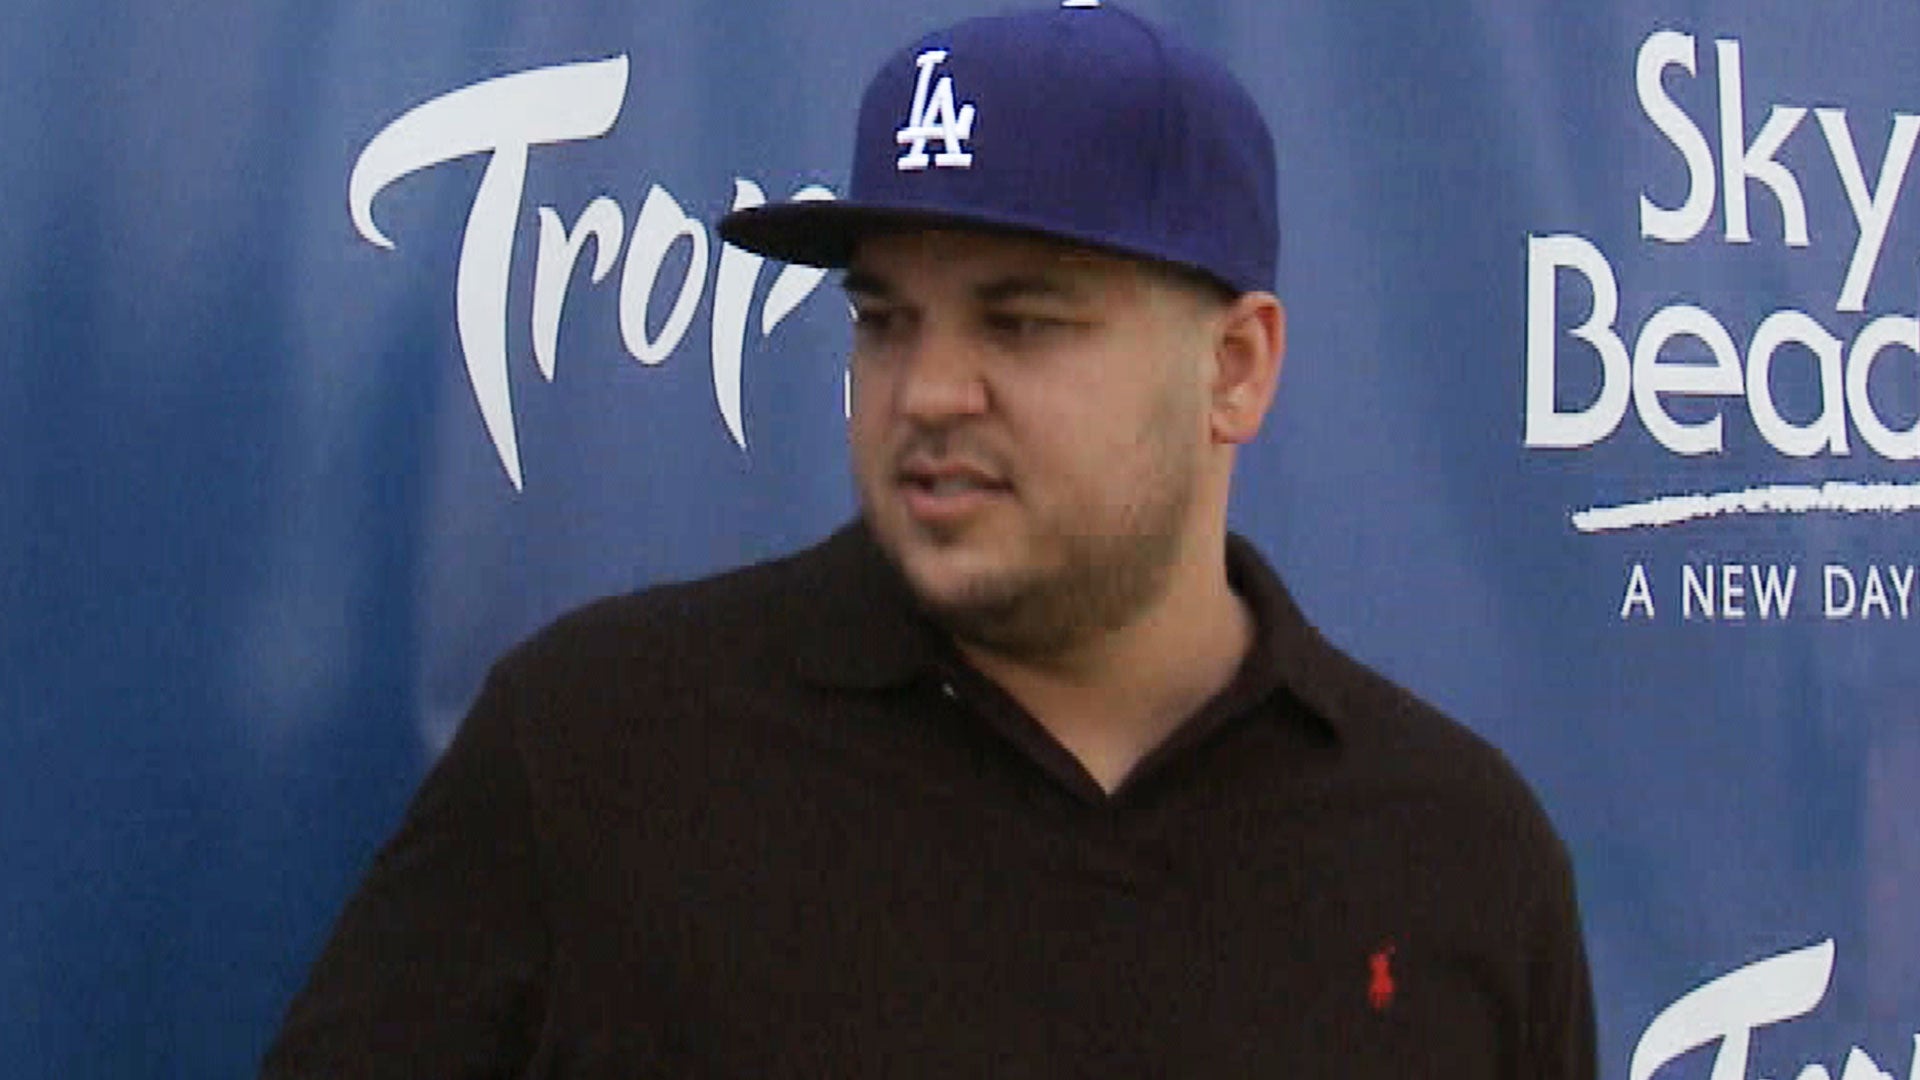  Rob Kardashian have a girlfriend? how true is this? Some Rumors Around It!